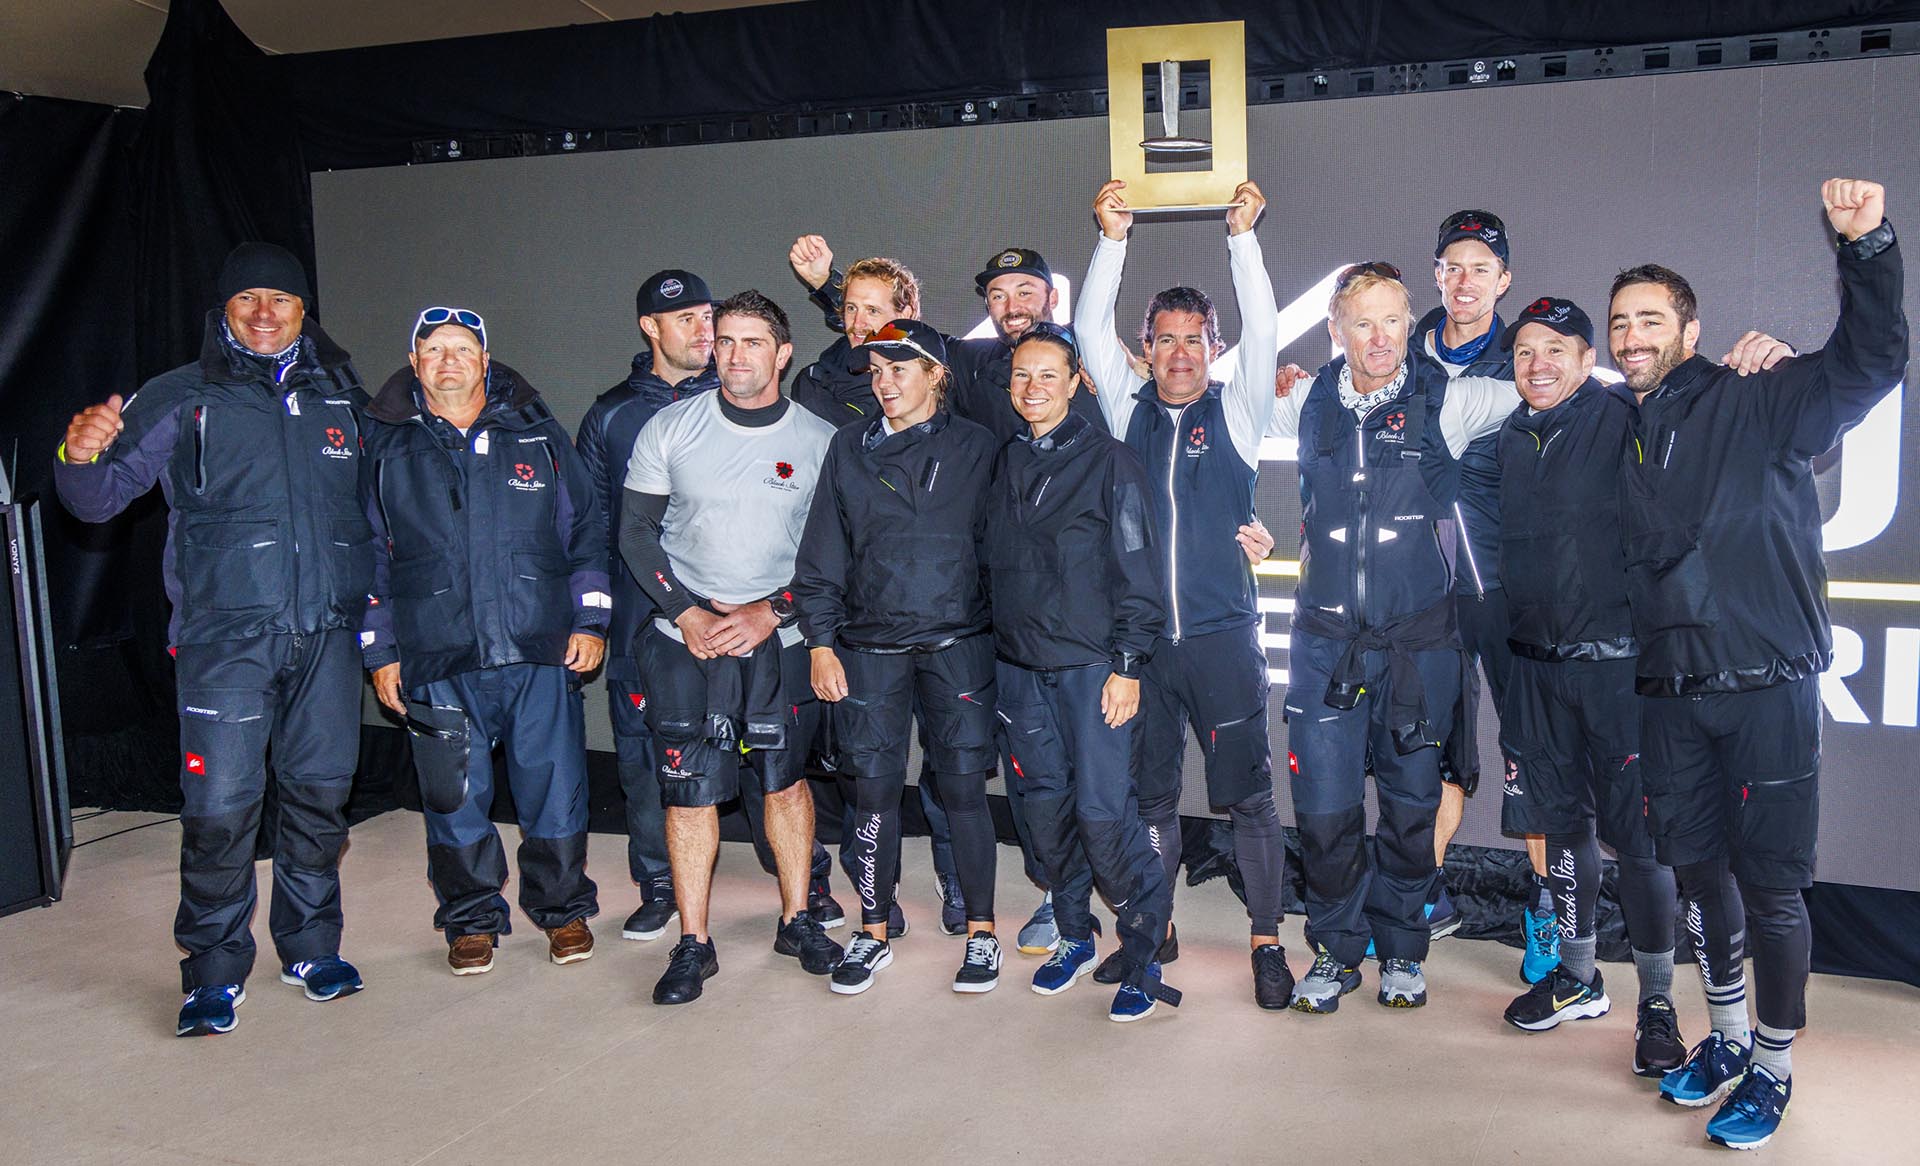 … while the Black Star Sailing RC44 team in third place in the 44Cup Alceadisa Marina will hopefully not be the last time they can celebrate an award.